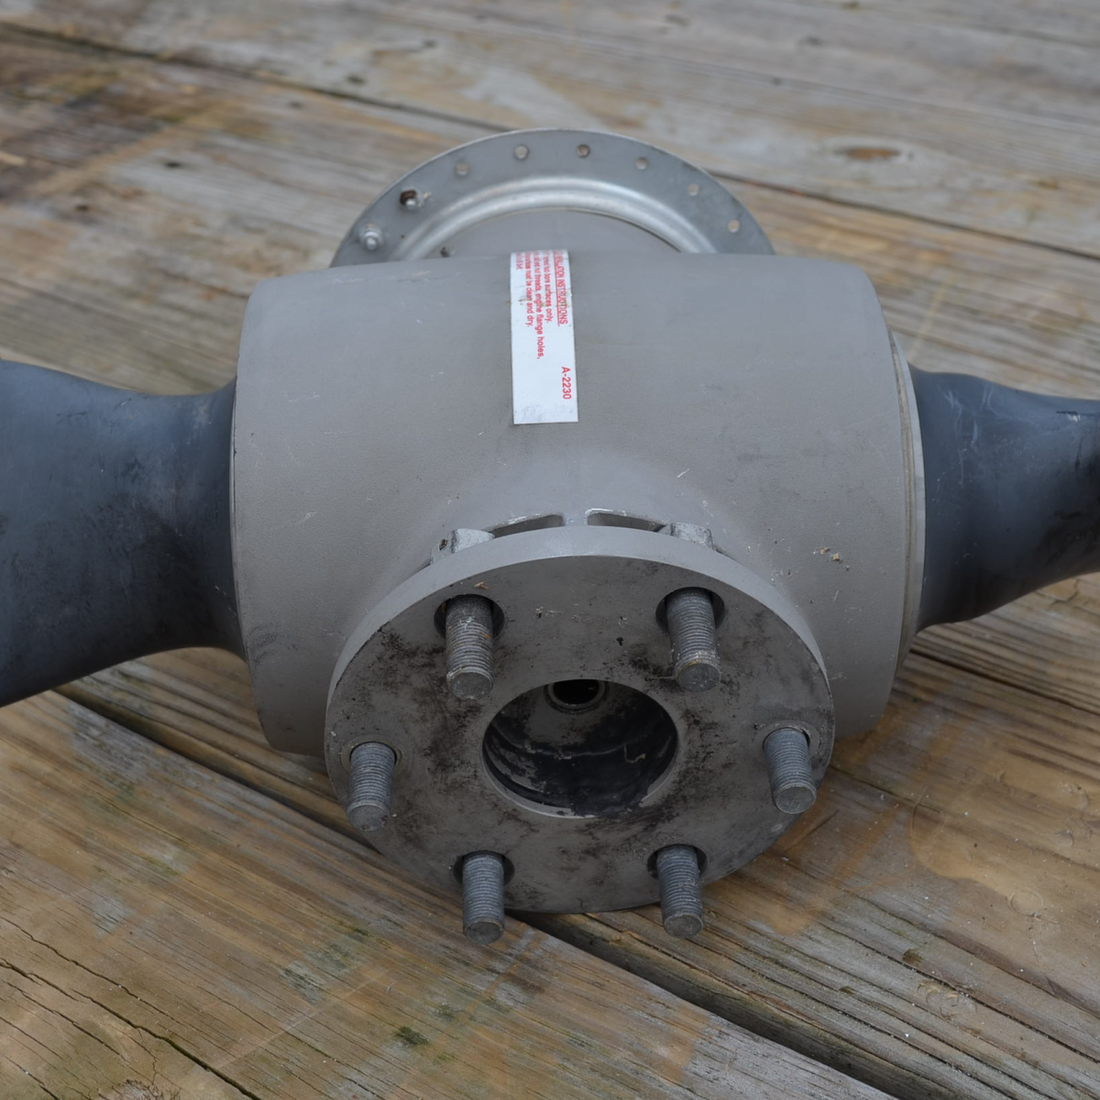 Used aircraft parts for sale, B2D34C215-B Cessna 172RG MCCAULEY - 2 BLADE PROPELLER (HUB PARTS ONLY SEE DETAILS)